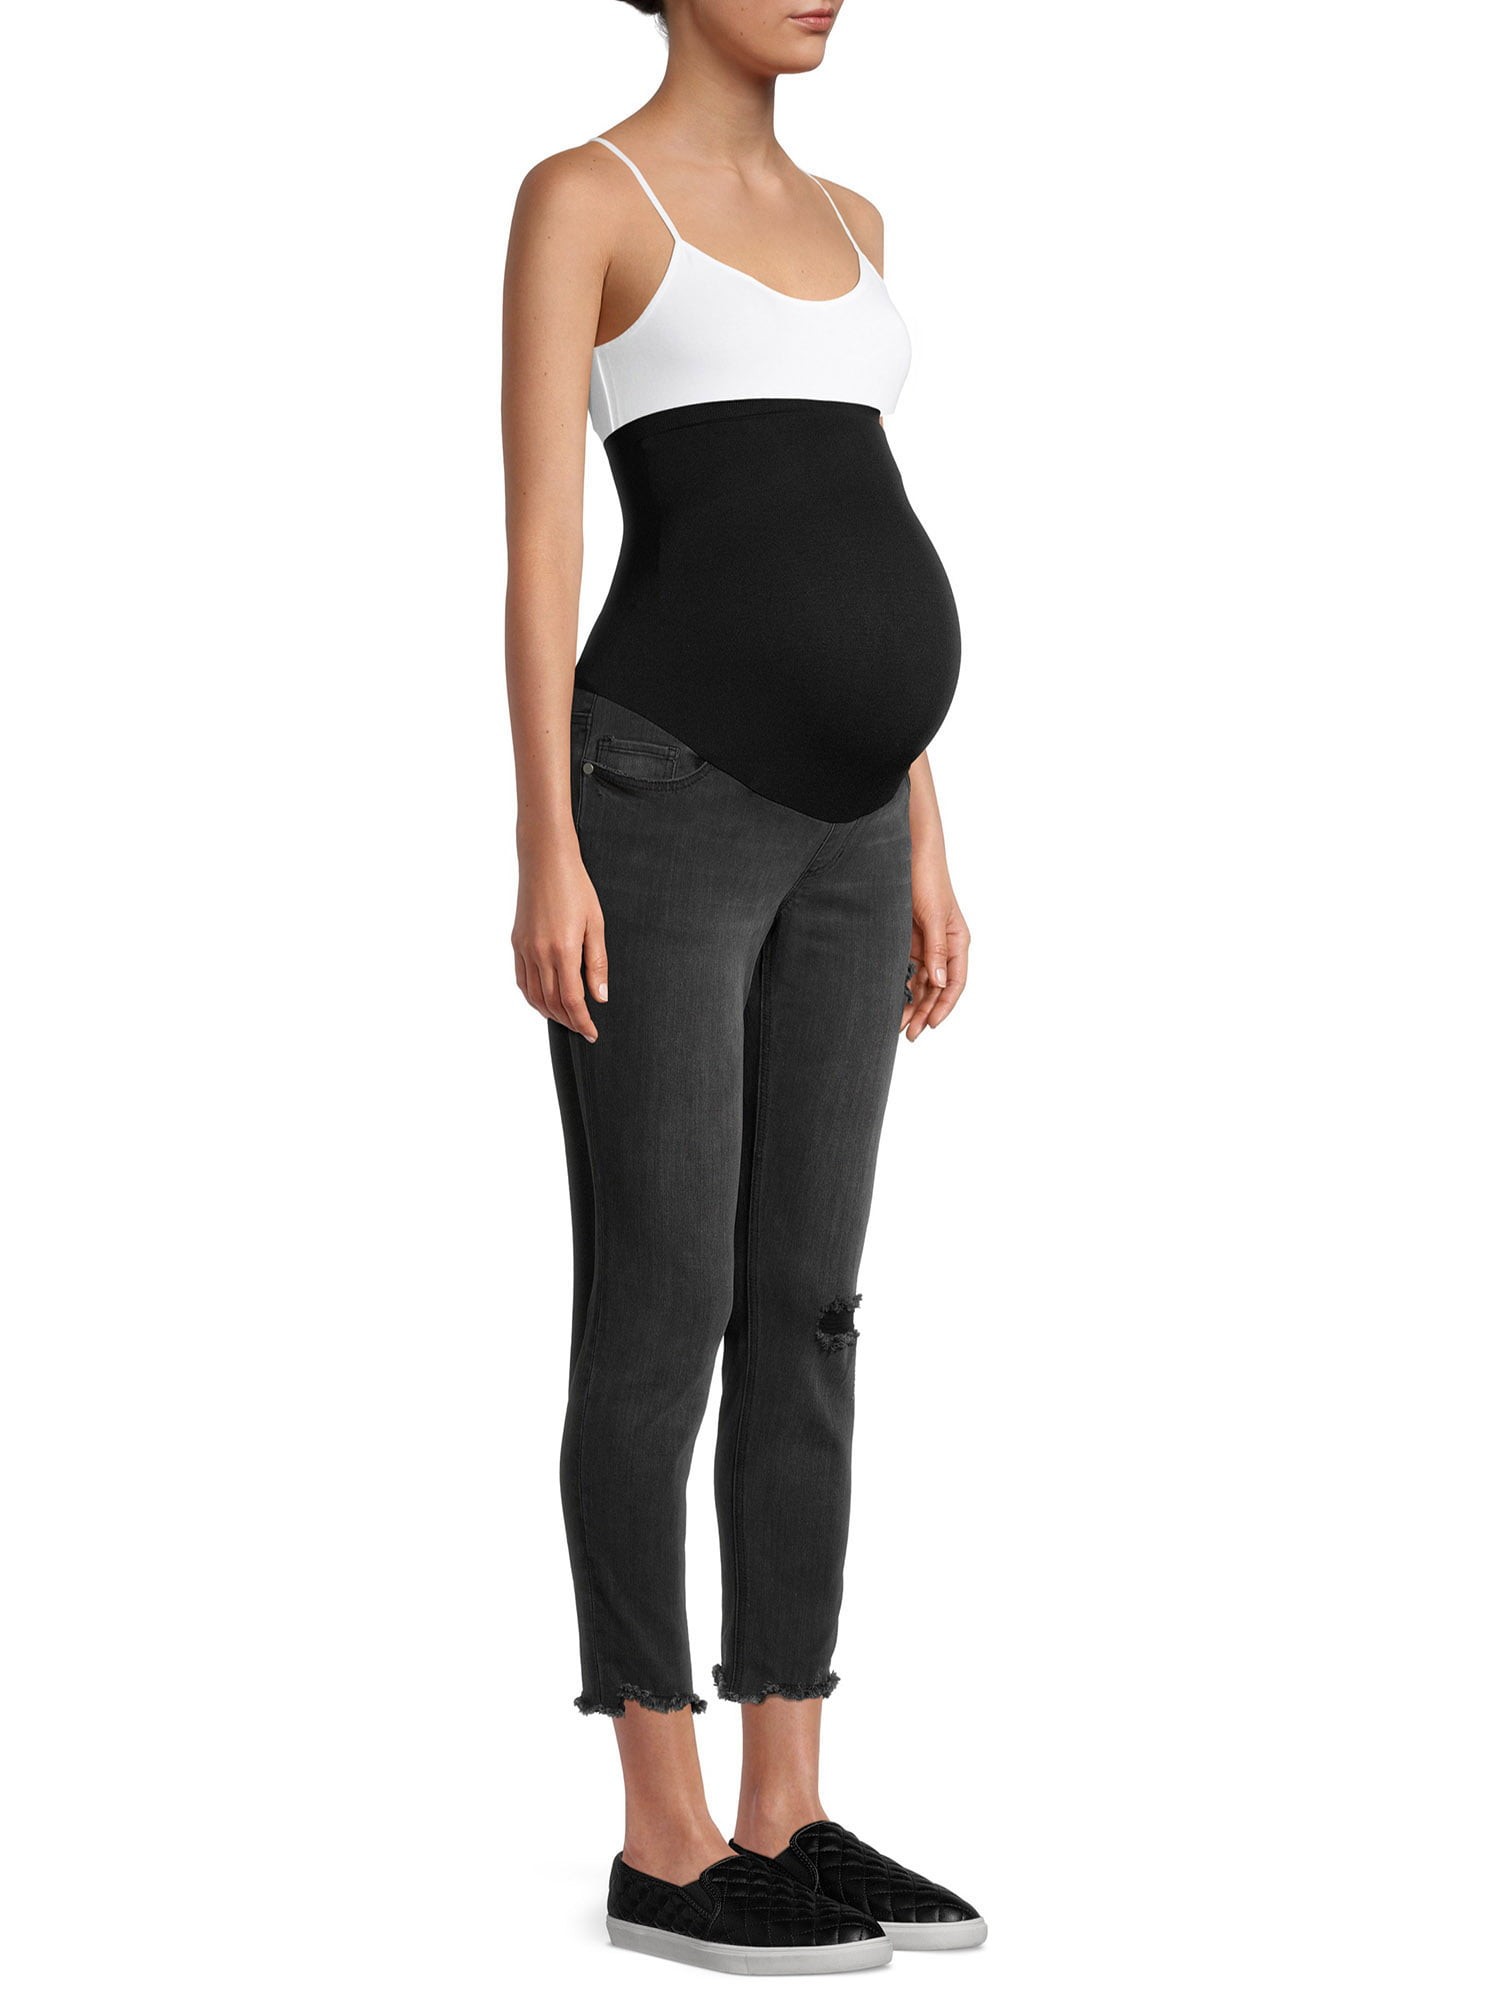 Over Belly Skinny Maternity Jeans - Isabel Maternity by Ingrid & Isabel